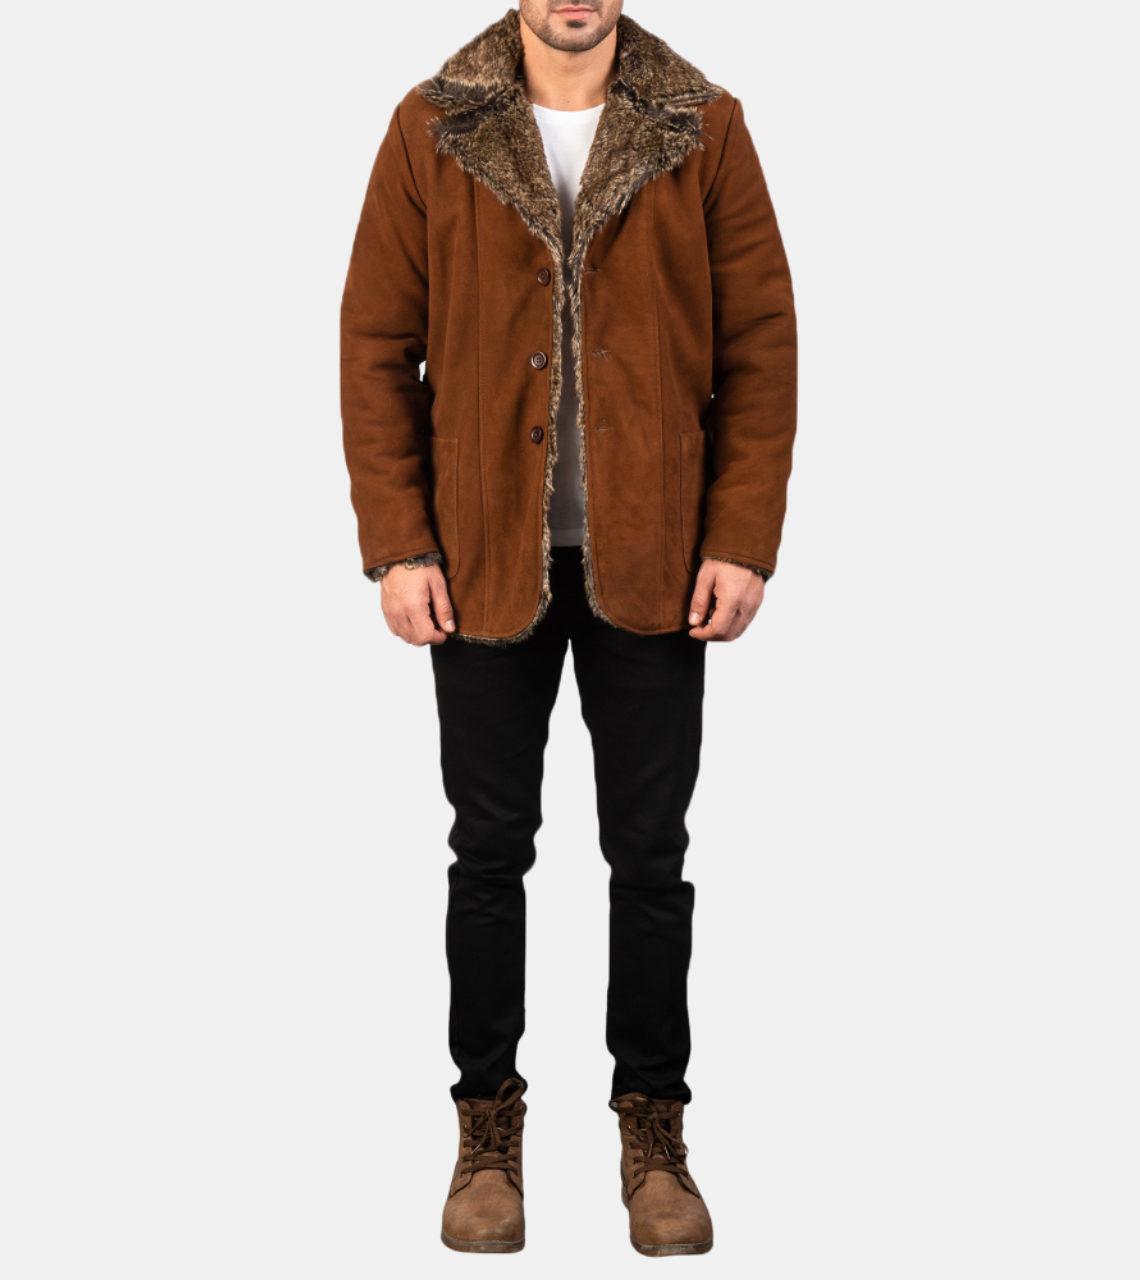 Shearling Suede Leather Jacket